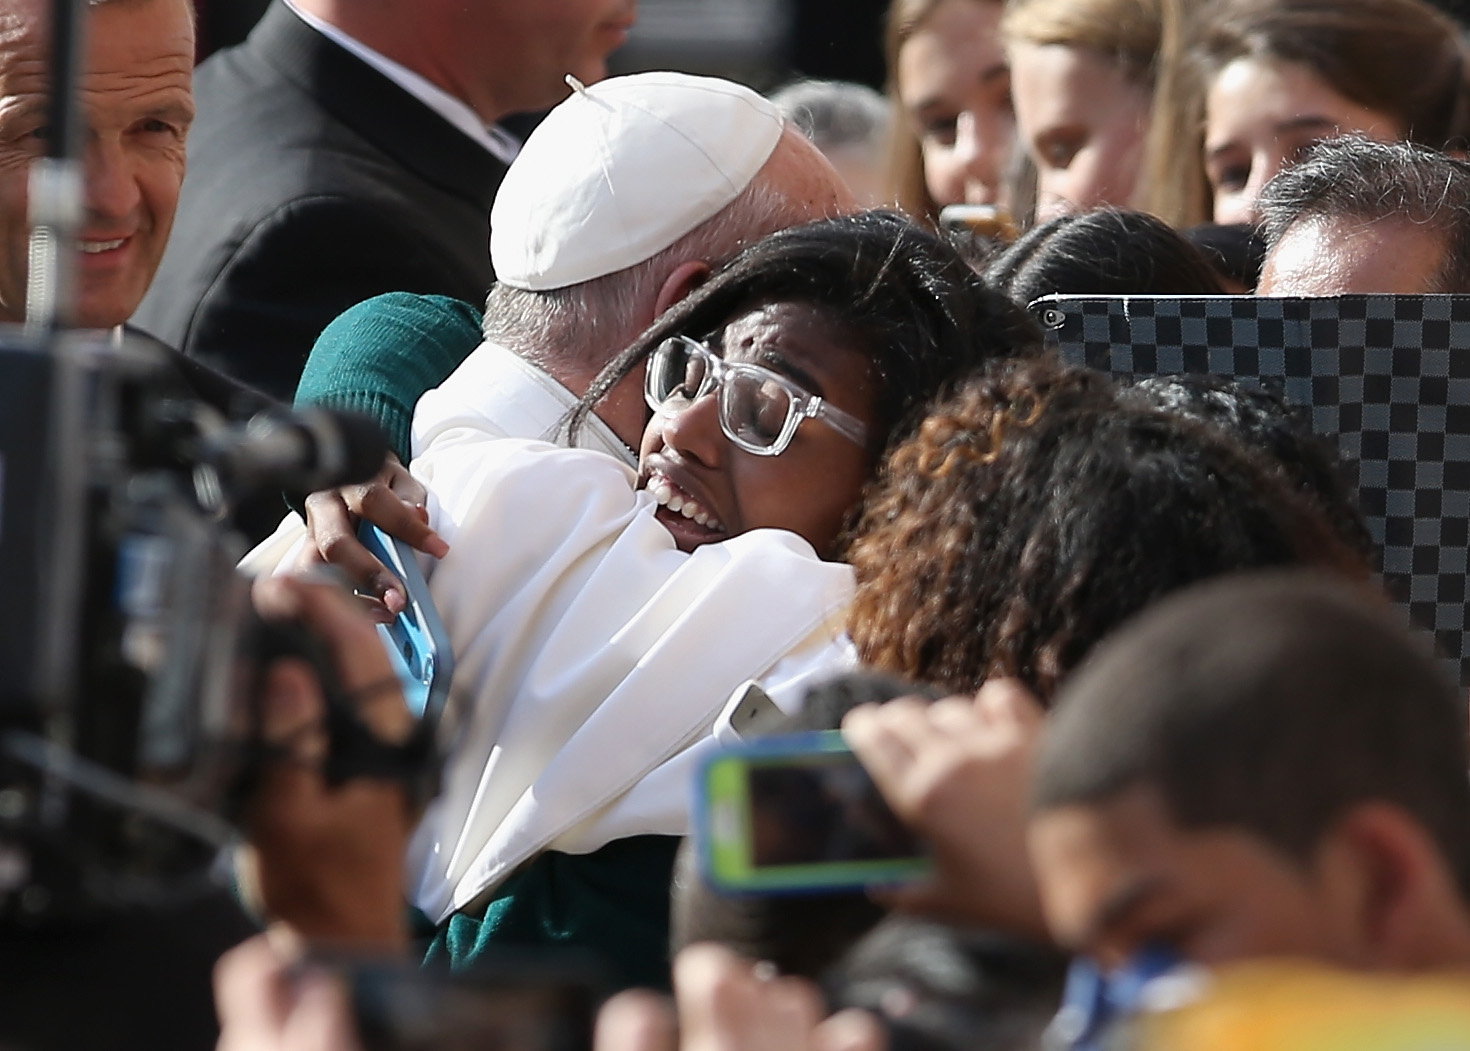 NEW YORK, NY - SEPTEMBER 25: Pope Francis greets school children upon his arrival to the Lady Queen of Angels school on September 25, 2015 in the Harlem neighborhood of New York City. The Pope visited the inner city Catholic school in east Harlem and met with children, immigrants and Catholic Charities workers on the second day of his visit to New York City. (Photo by John Moore/Getty Images)